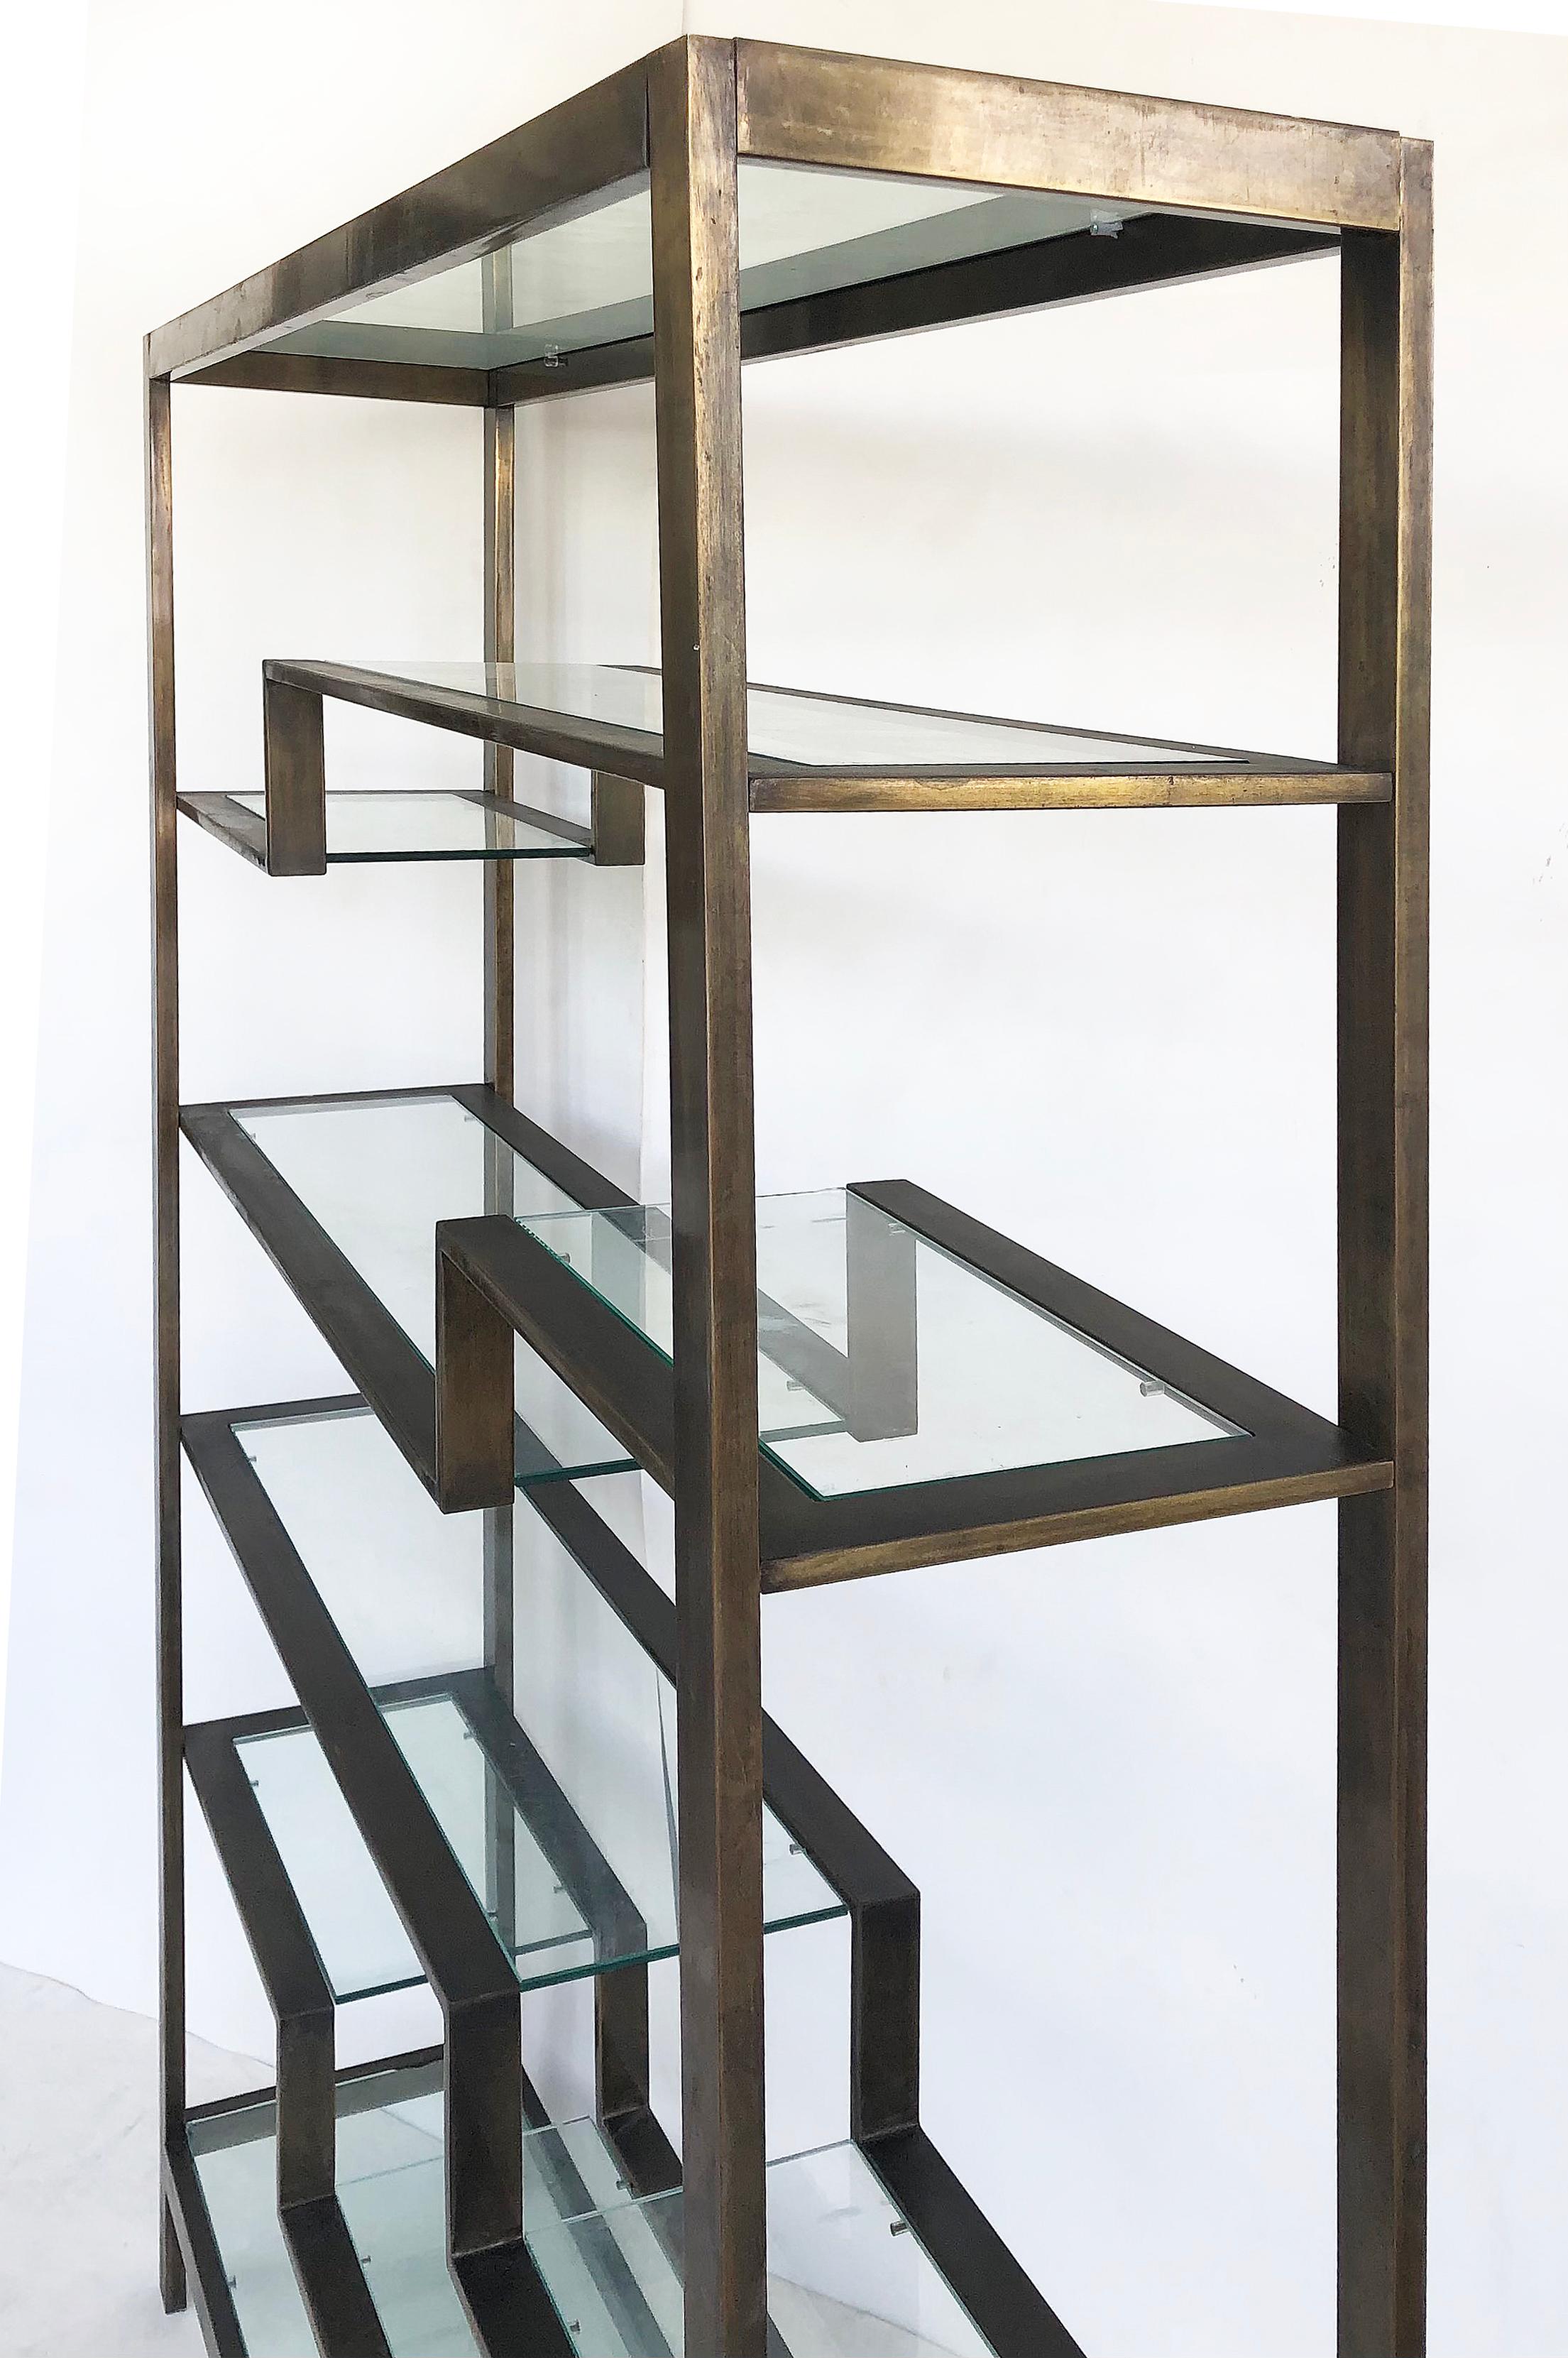 20th Century Bronzed Finish Mid-Century Modern Etagere Metal Shelving with Glass Shelves